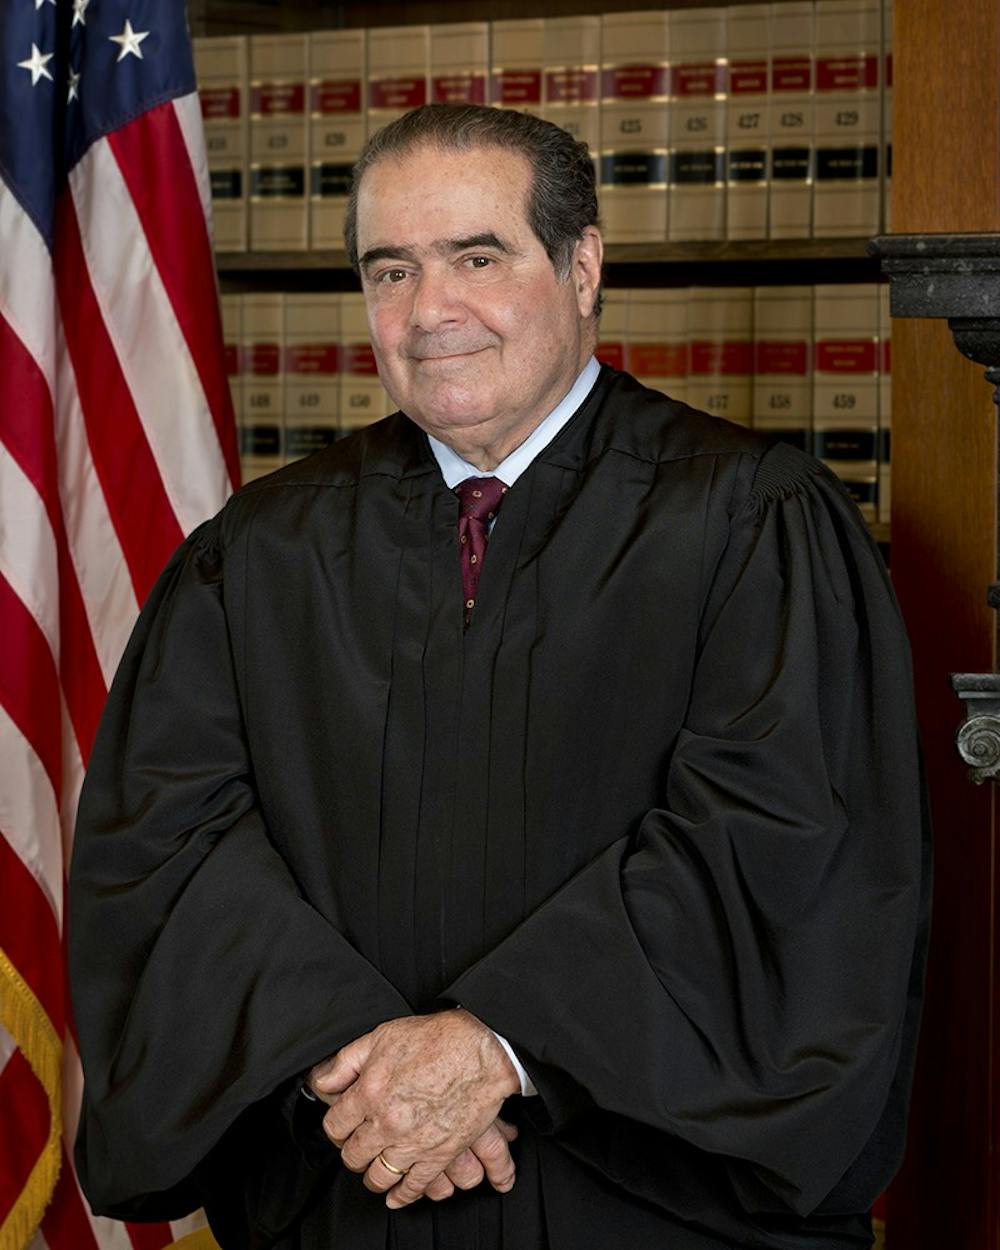 Justice Antonin Scalia, who served on the Supreme Court for nearly three decades, died Feb. 13.